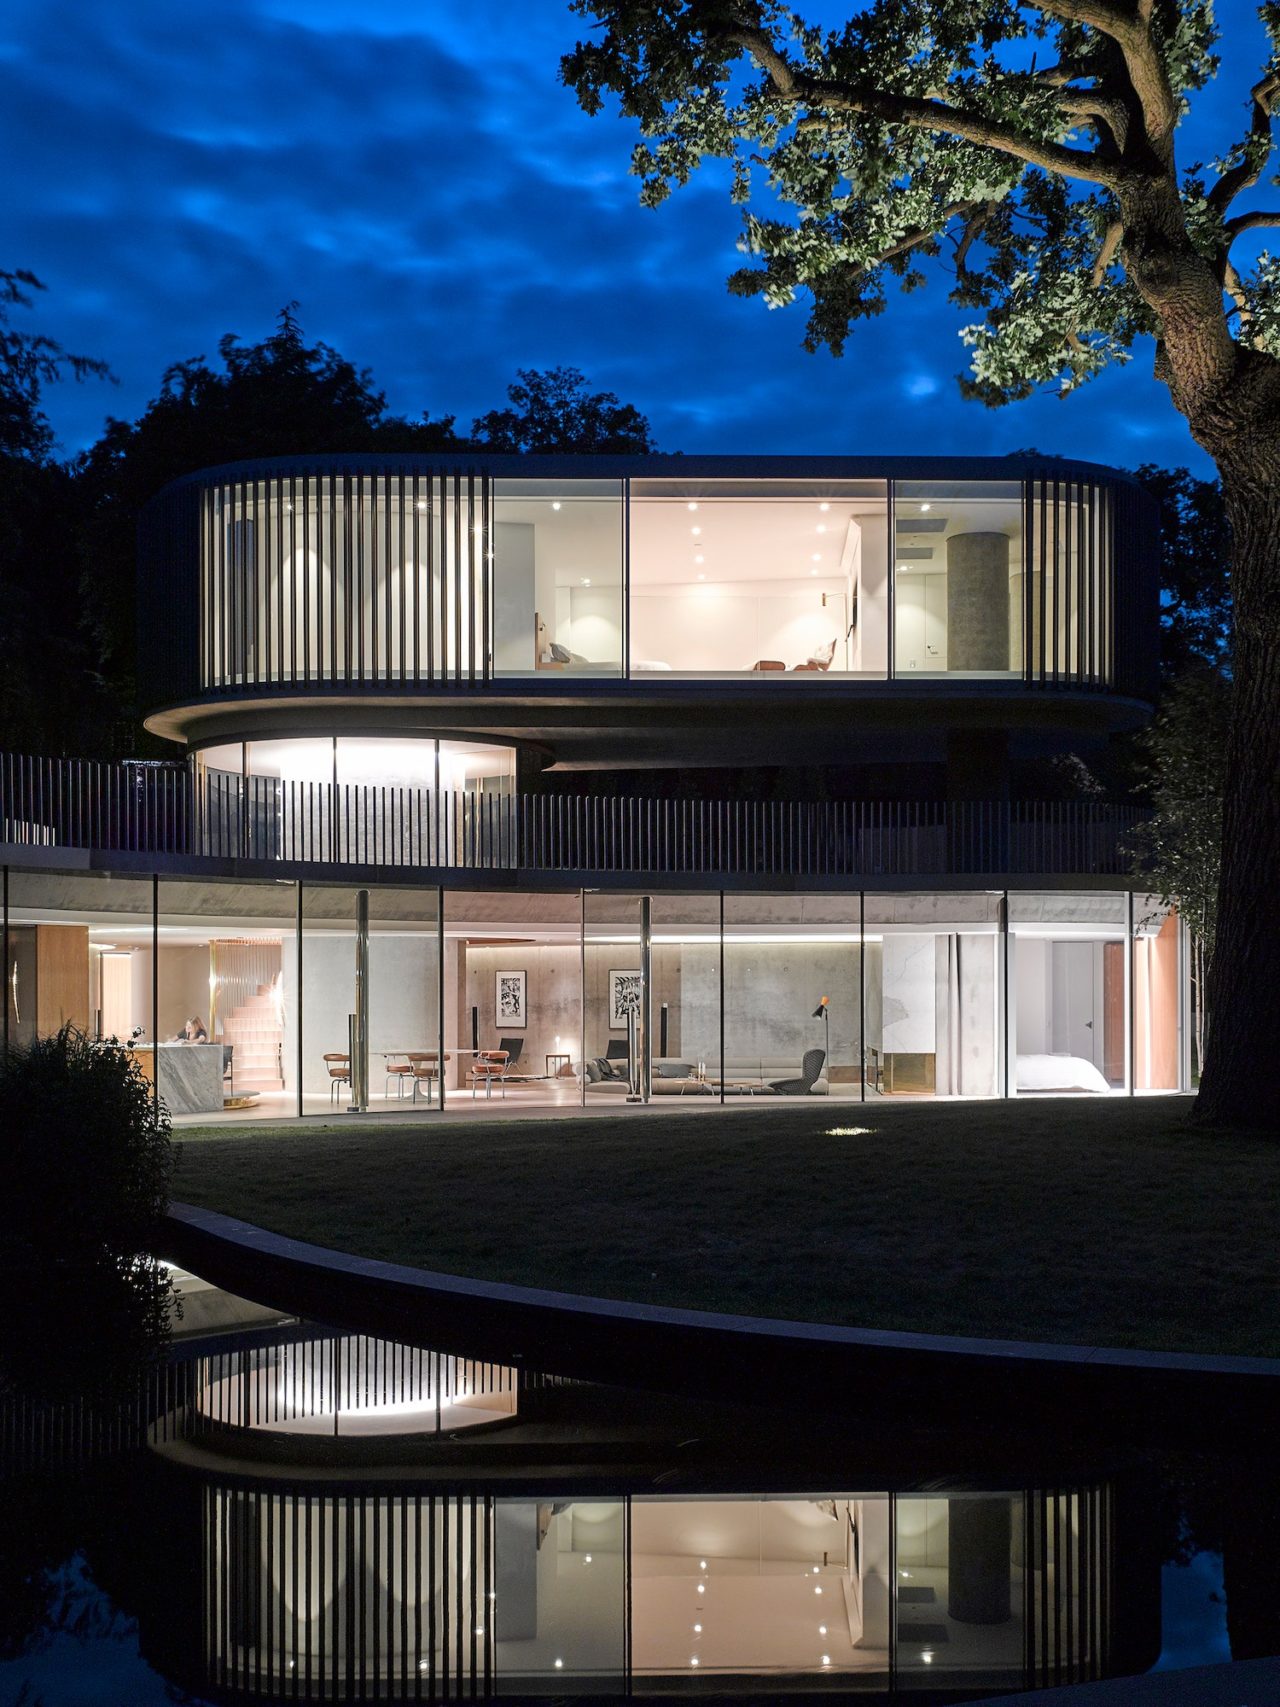 An unexpected contemporary house in a quiet London suburb